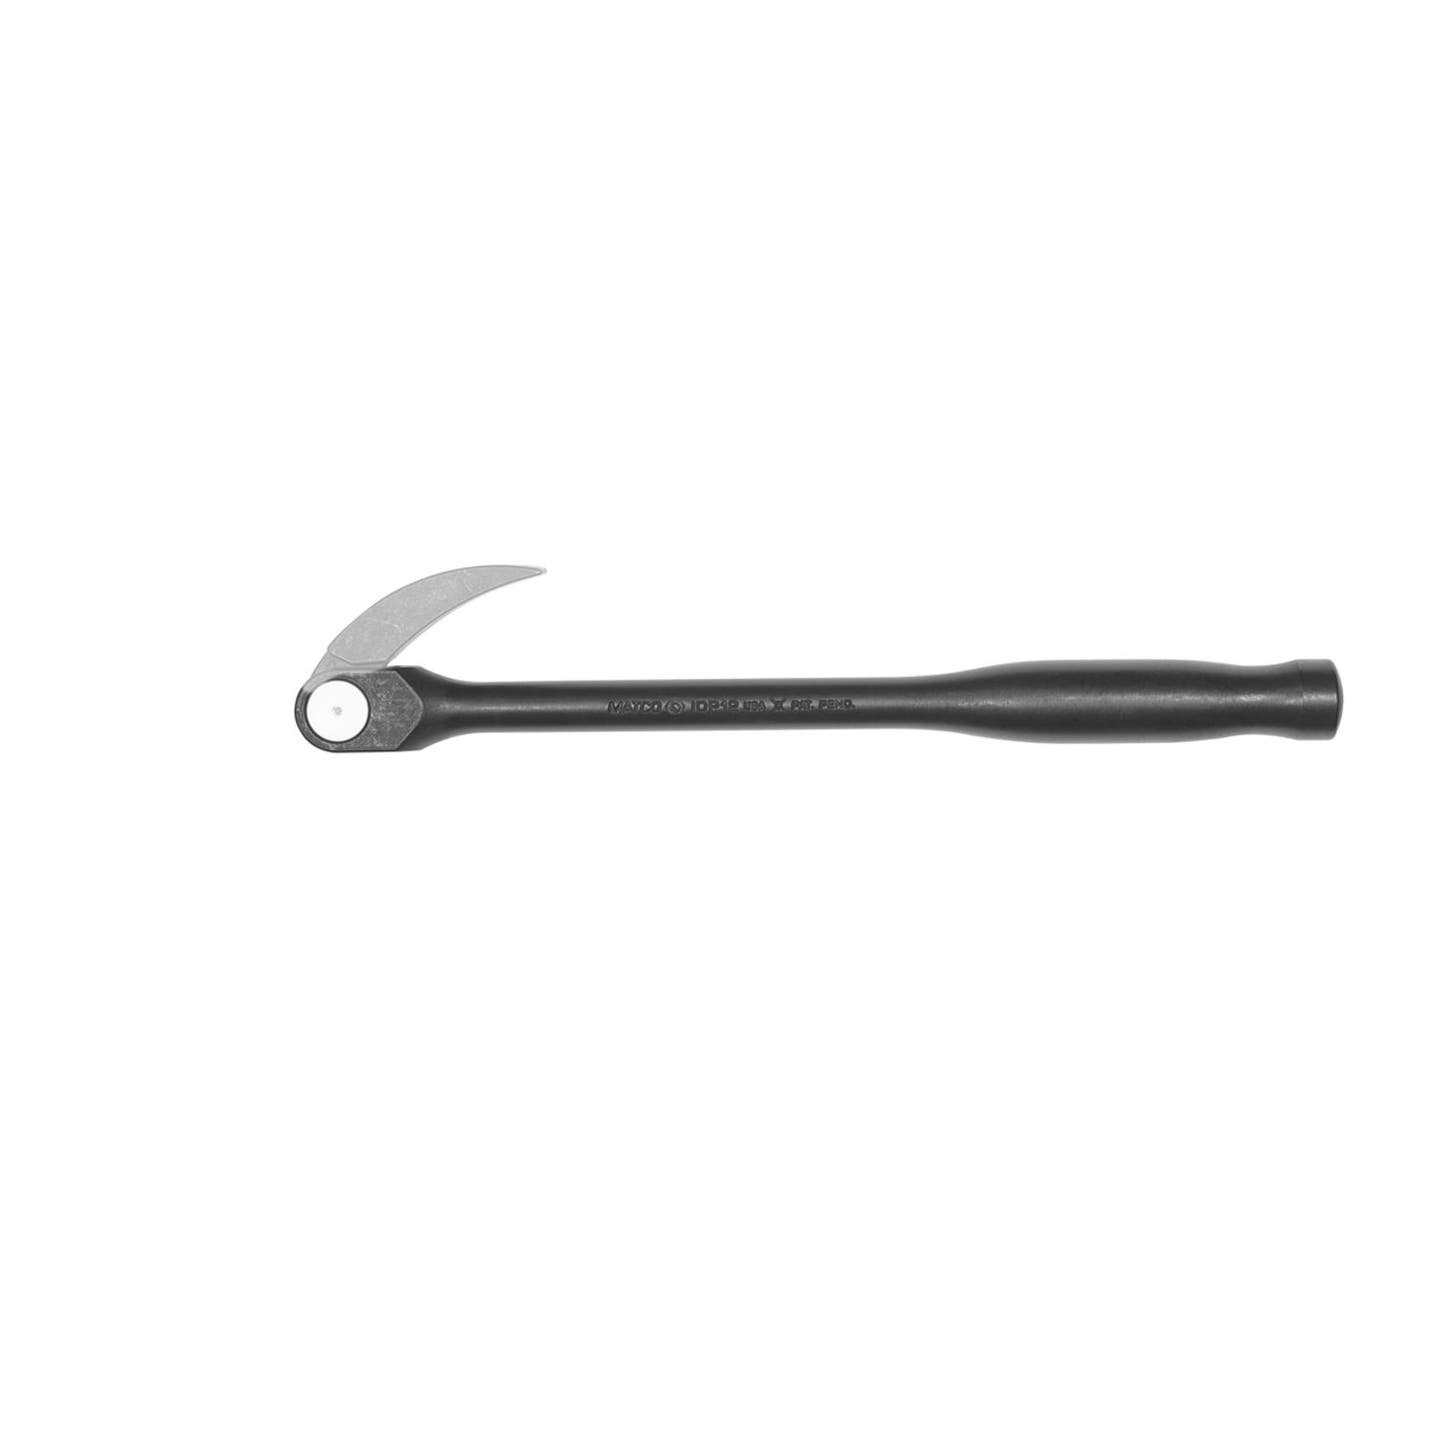 12" LONG INDEXABLE PRY BAR WITH METAL HANDLE